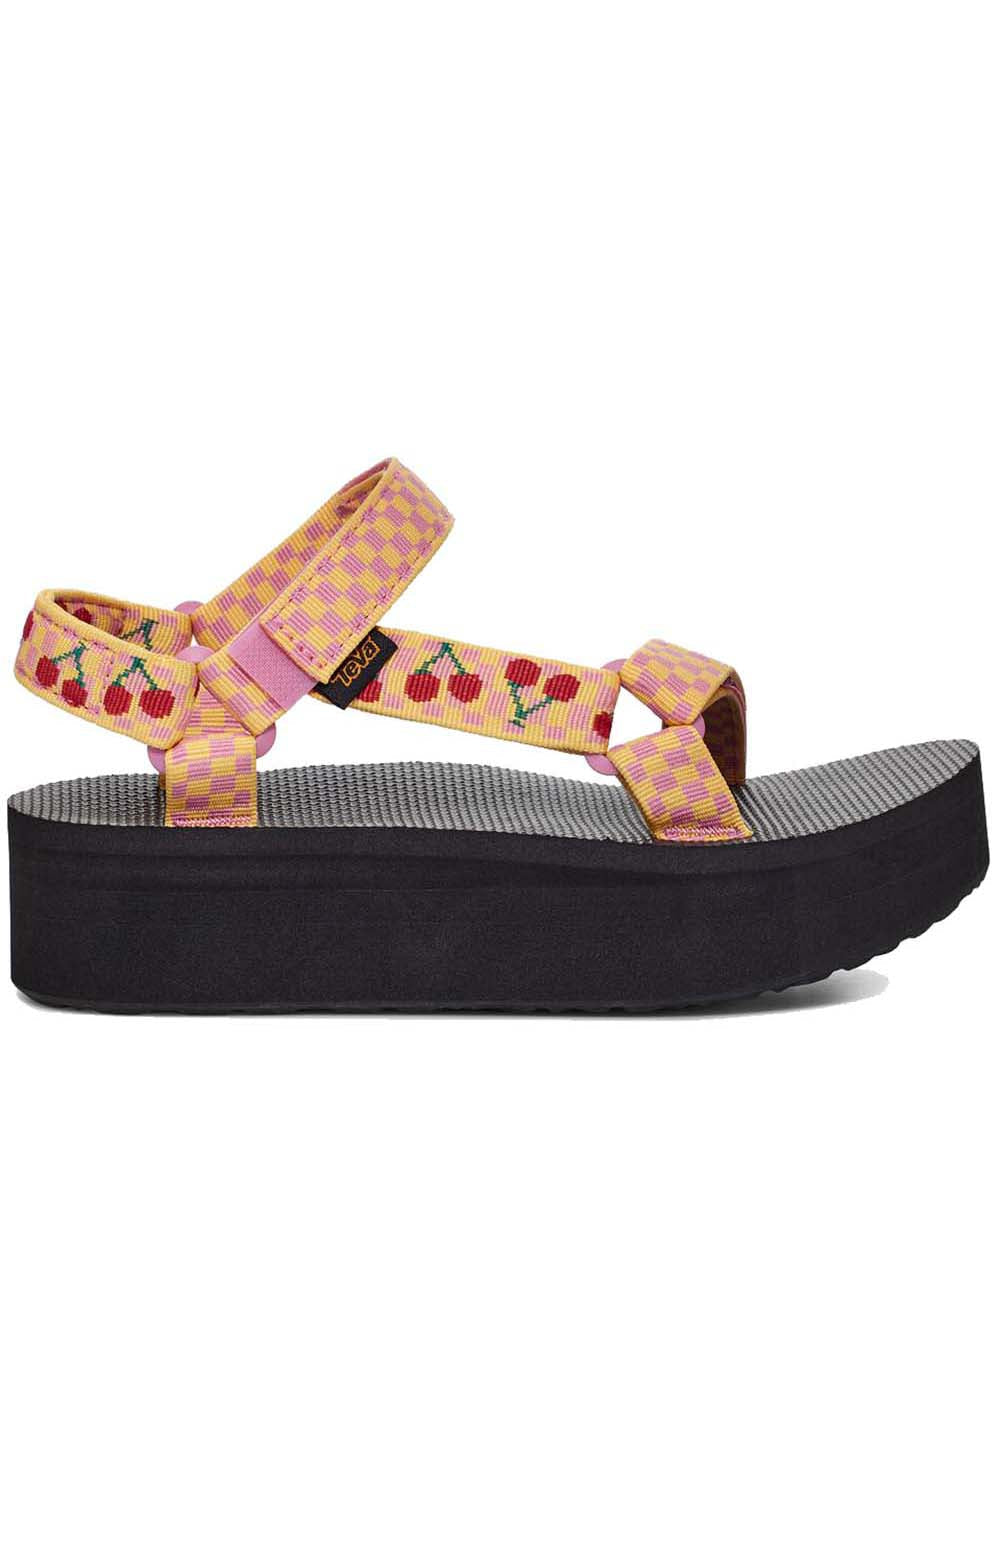 Pair of Teva Universal Flatform Sandals in Picnic Cherries and Rosebloom 1008844, the perfect summertime footwear for outdoor adventures and casual outings